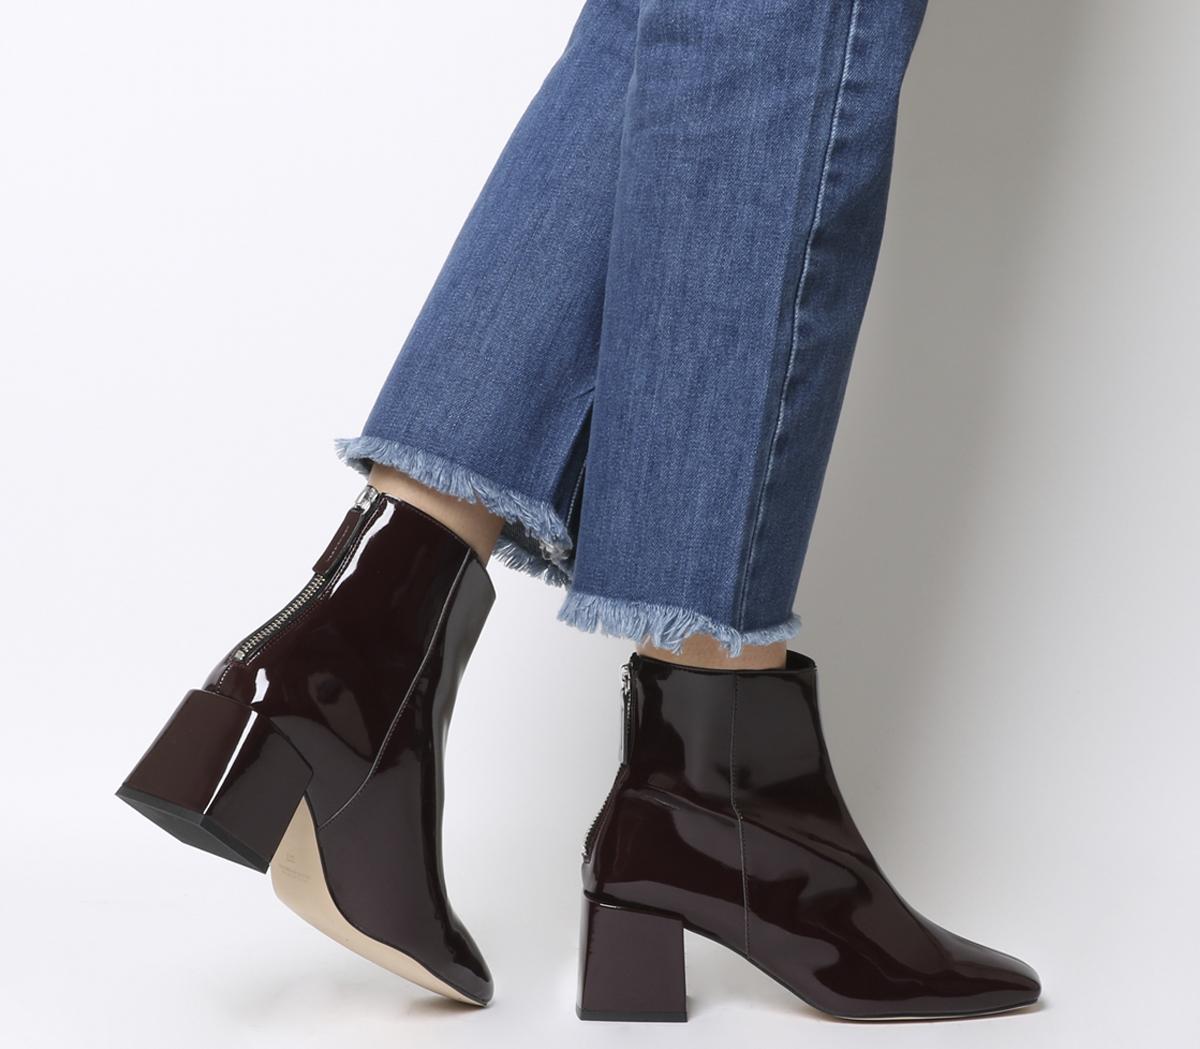 wine patent ankle boots